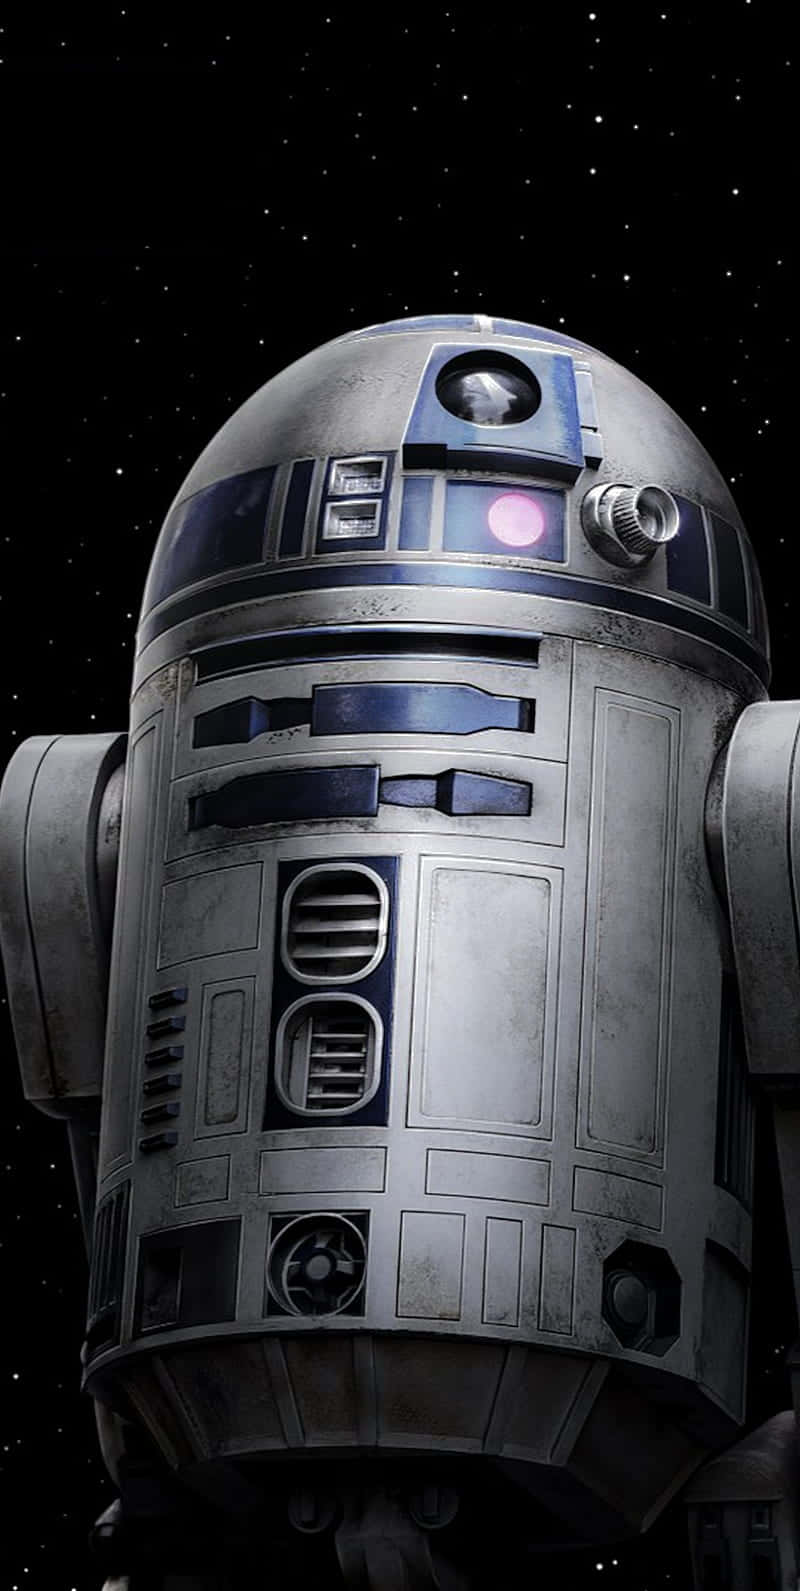 R2D2, the iconic droid from the Star Wars universe Wallpaper